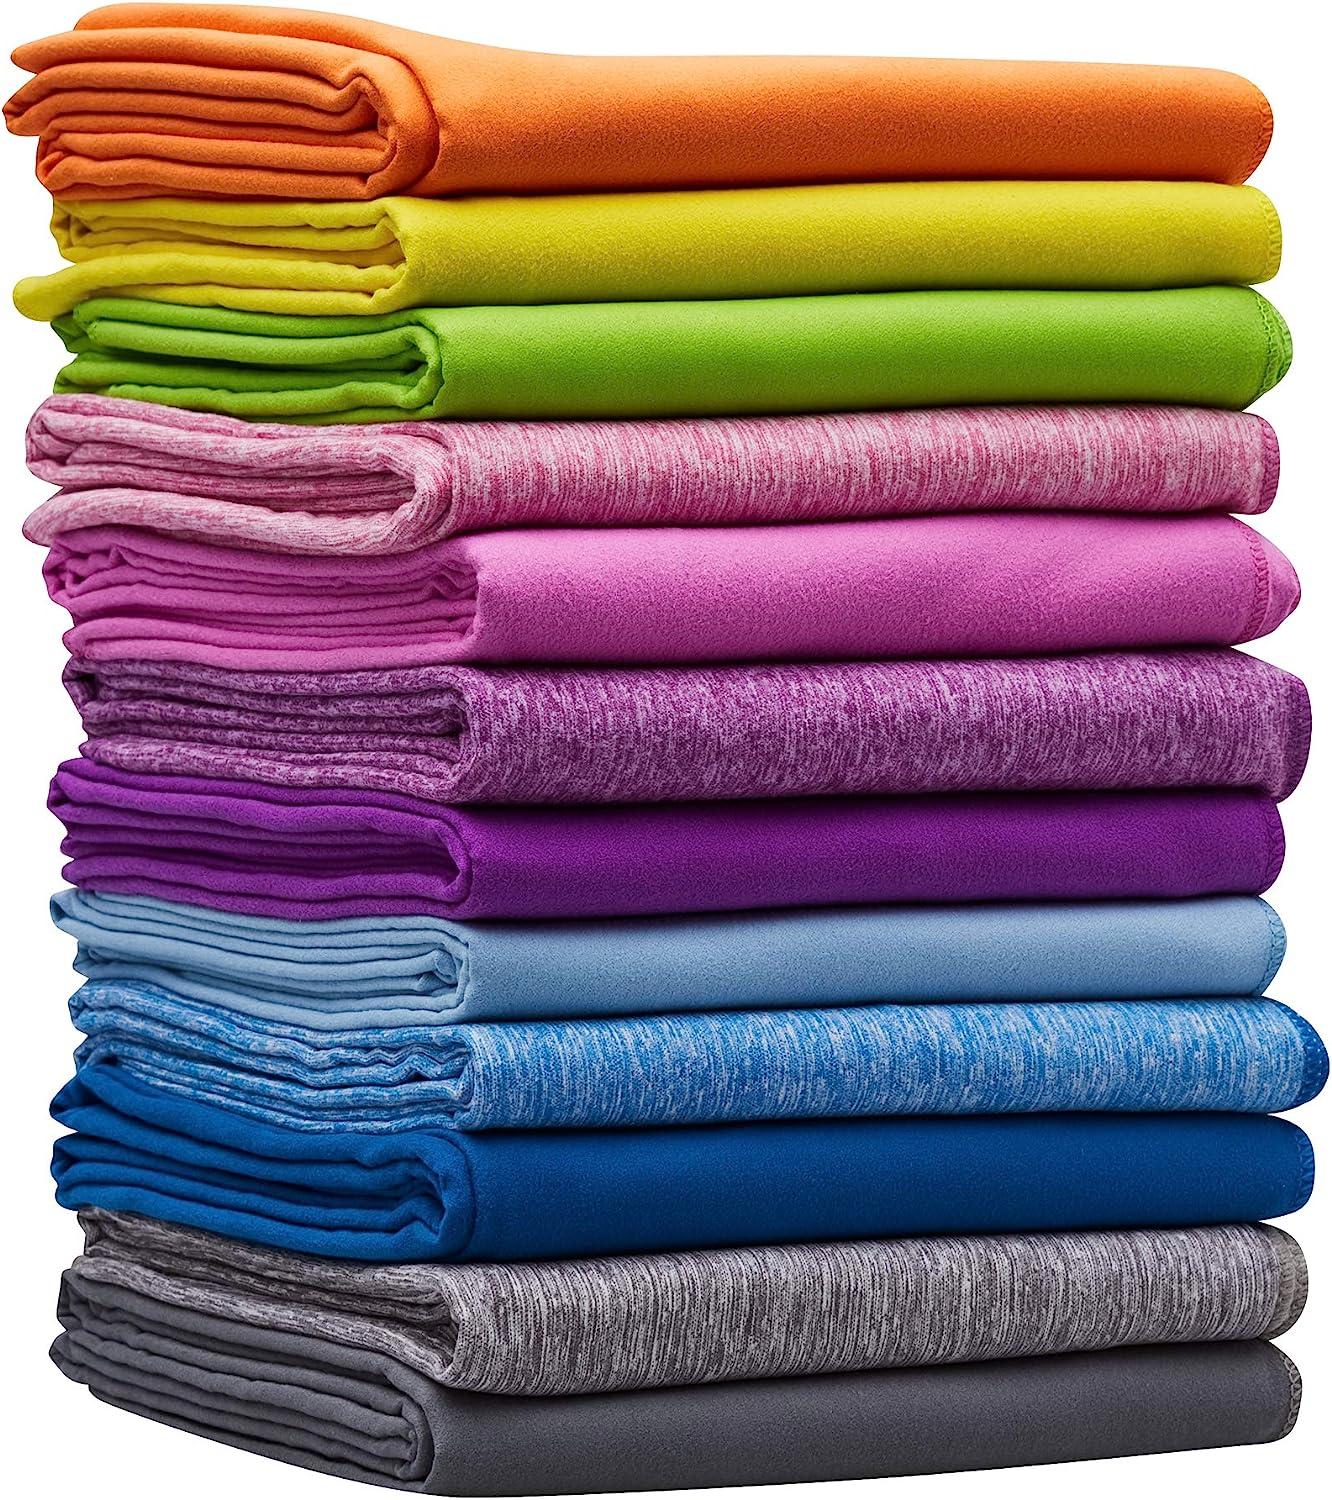 XL Travel Towel - 2in1 Large Quick Dry Extra Soft Microfiber, 13 Colors,  Lightweight for Gym, Swim Practice, Travel, Backpacking, Camping, RV,  Beach